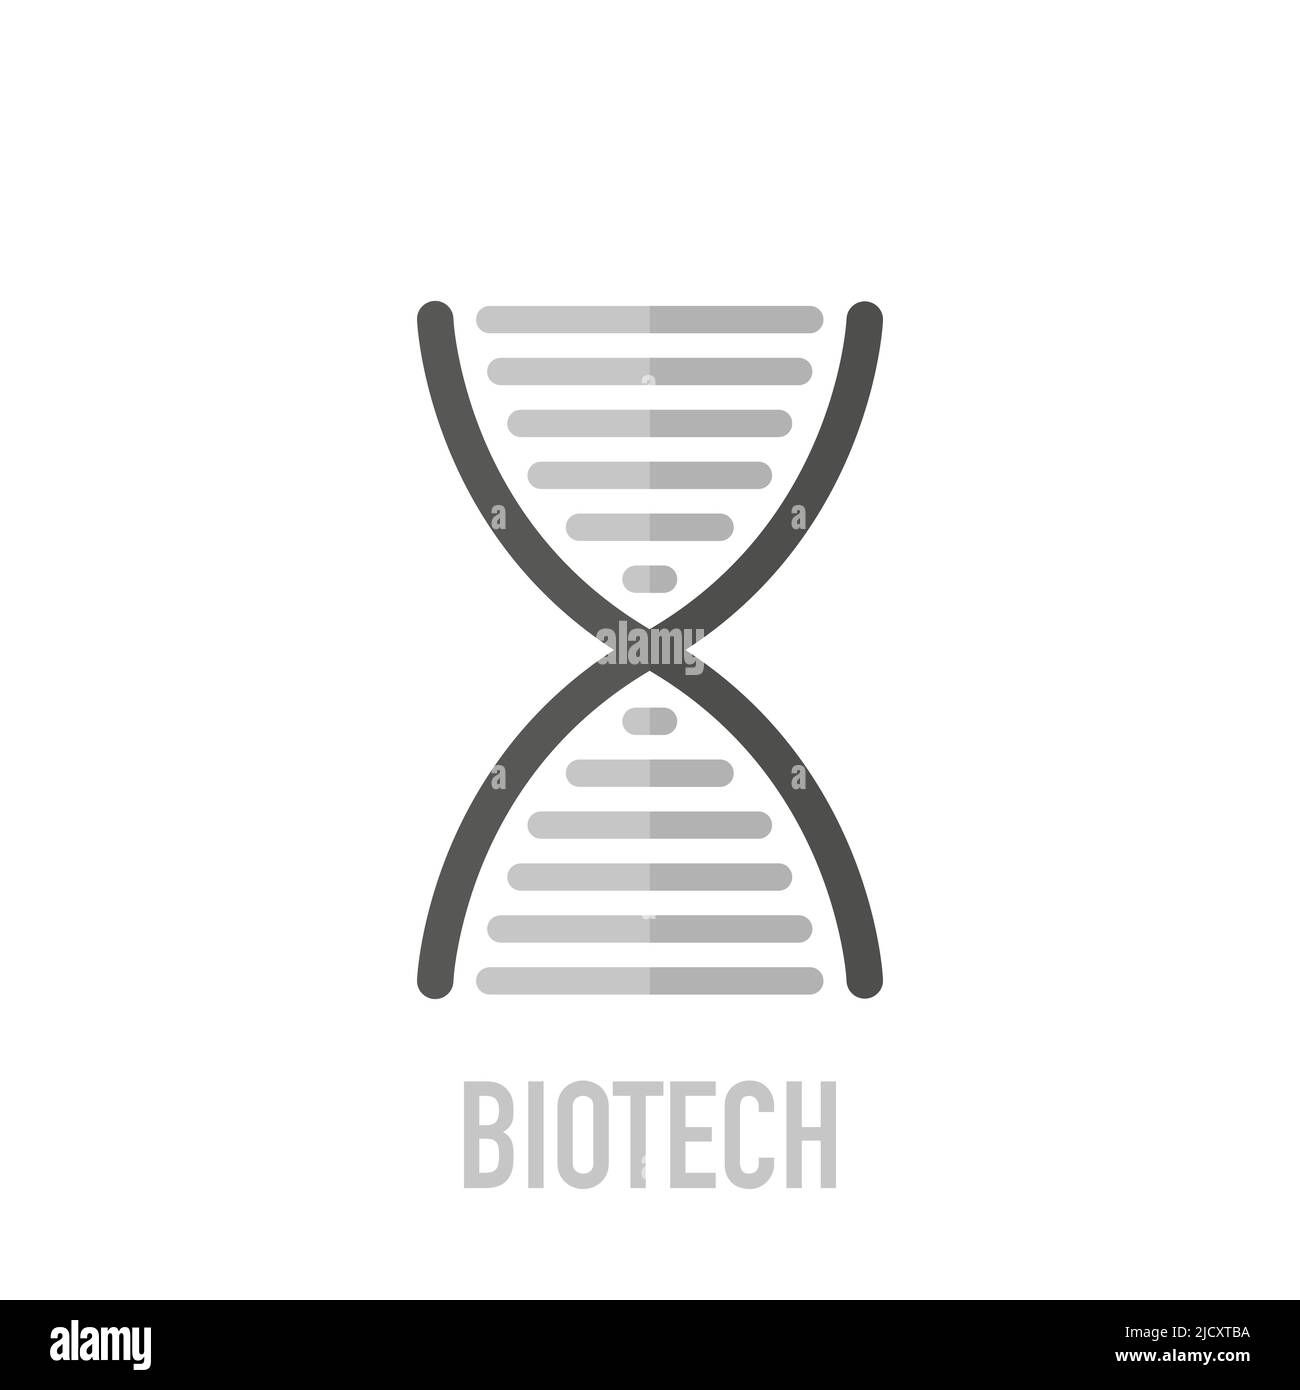 Stylish Biotech Logo Template. The Biotech logo for use as a DNA sequencer. Stock Vector